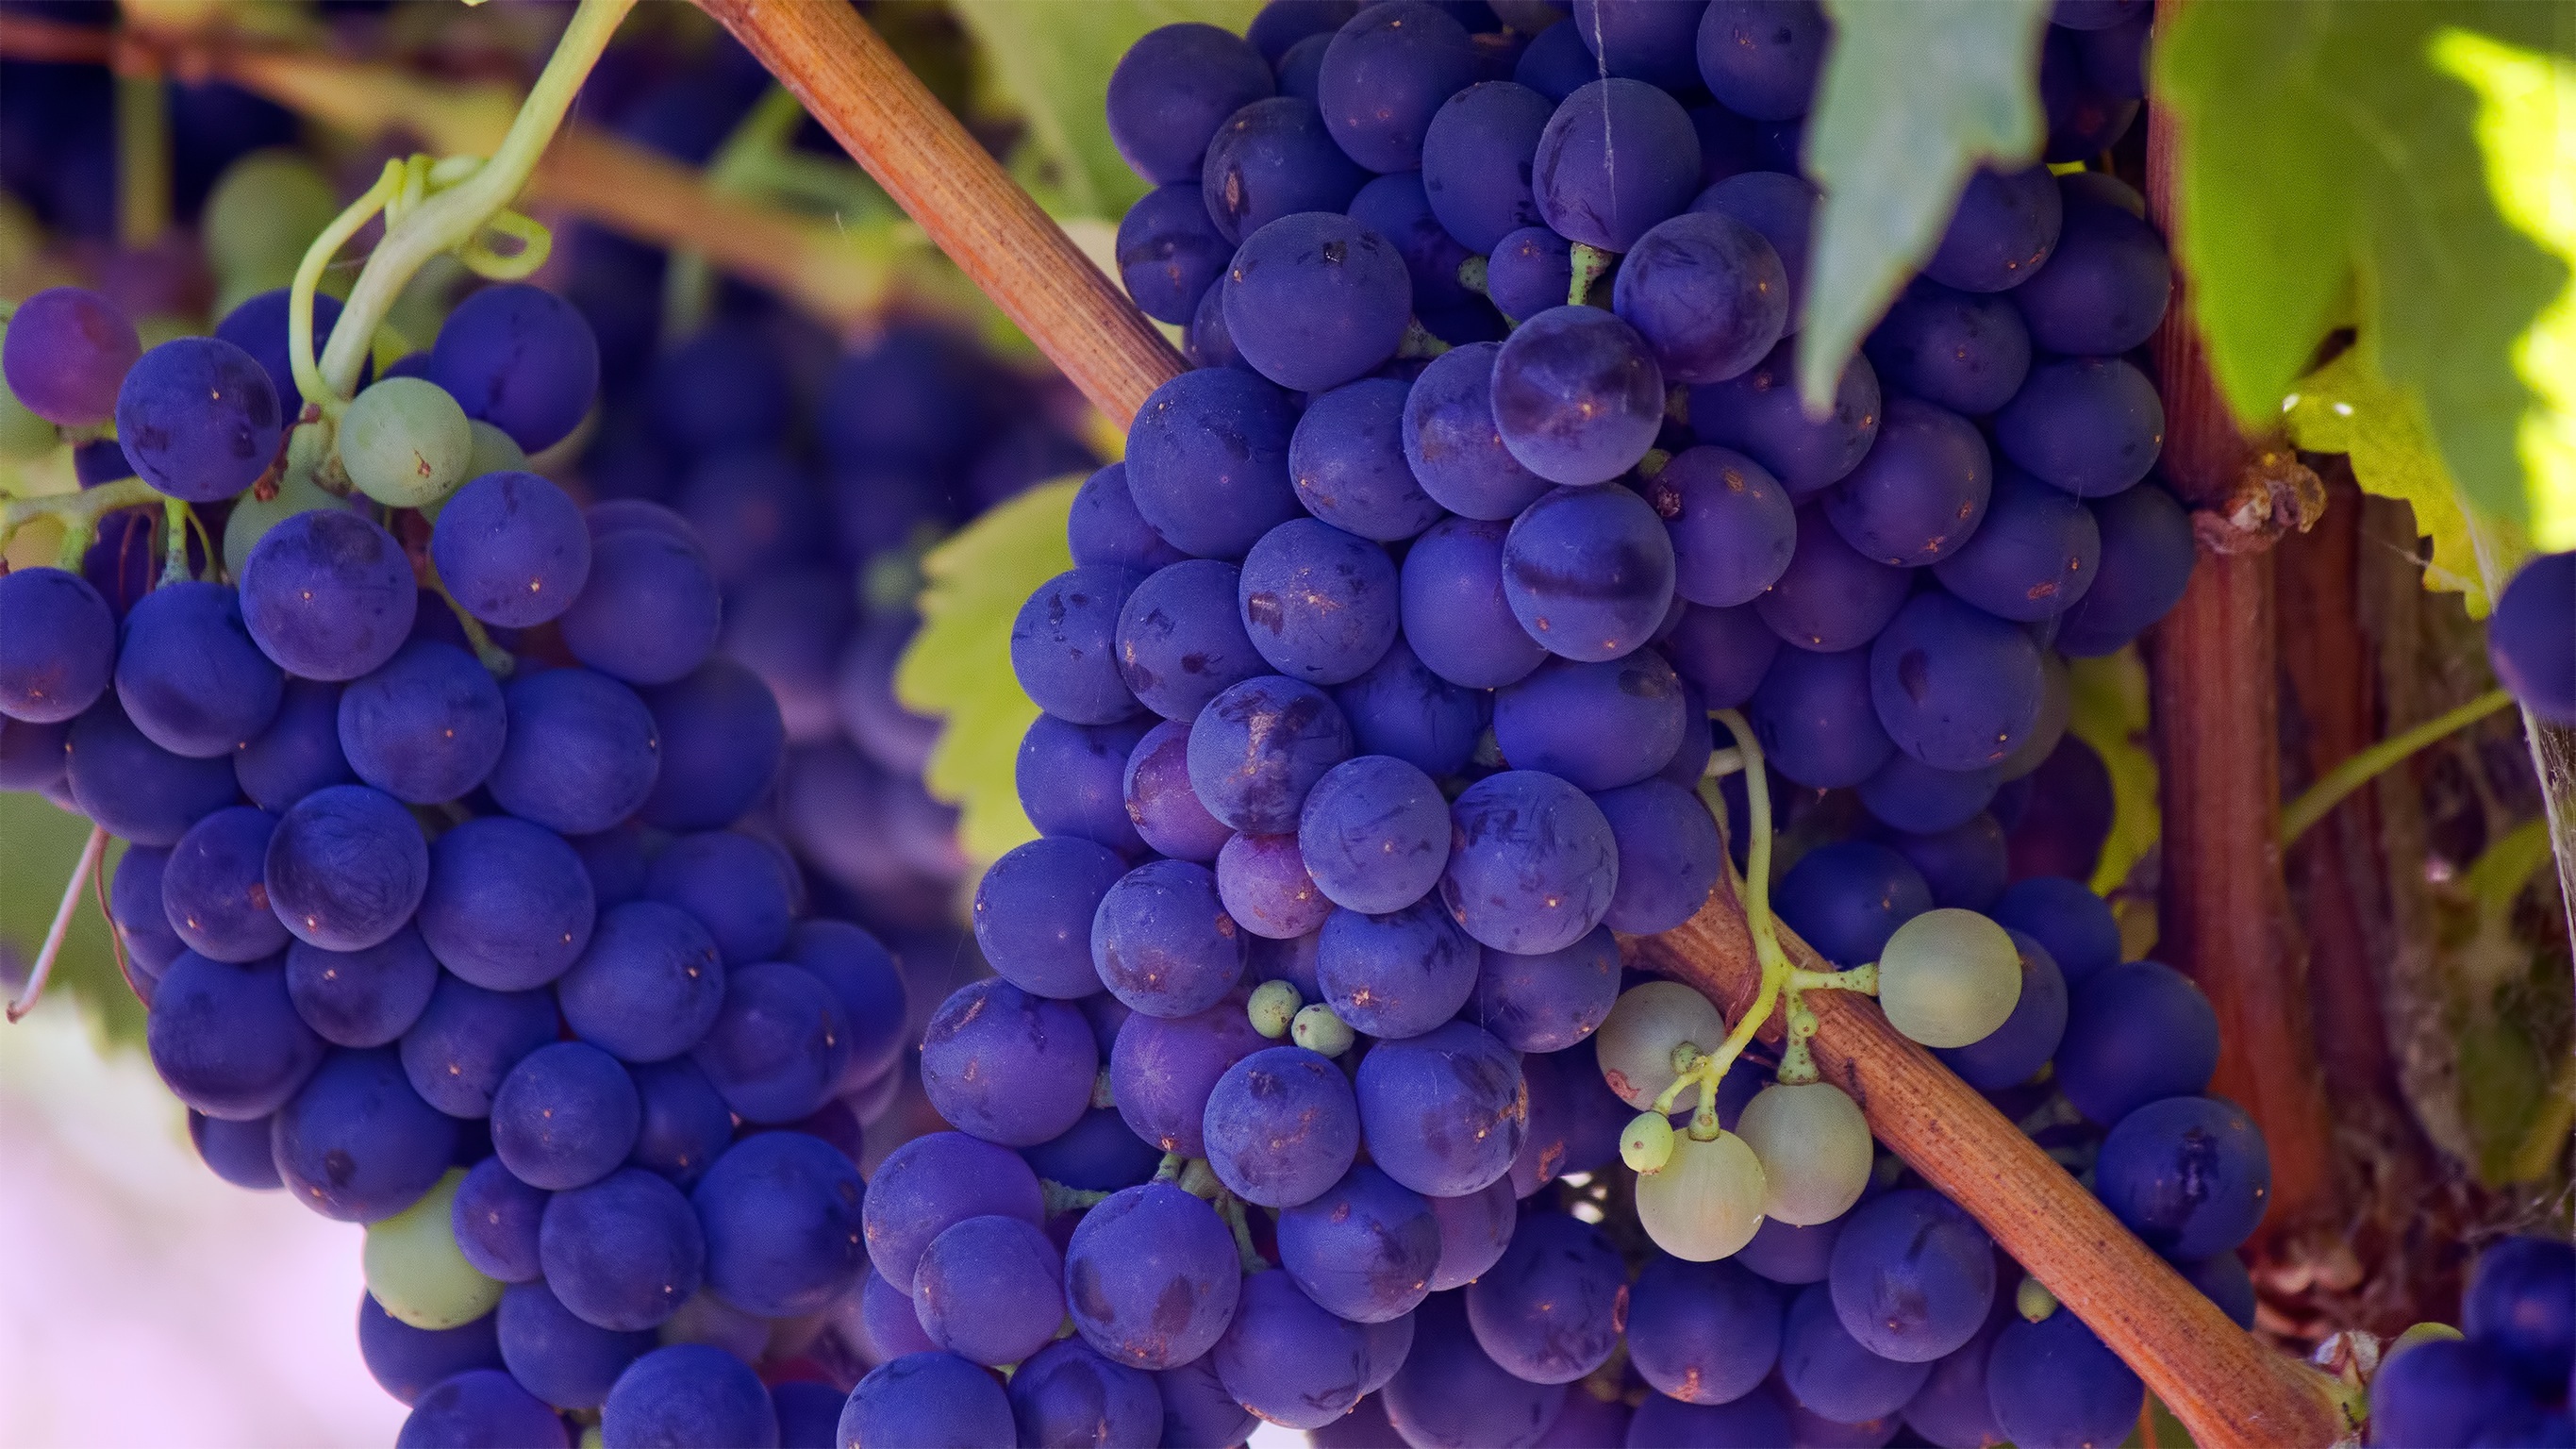  Grapes HQ Background Images